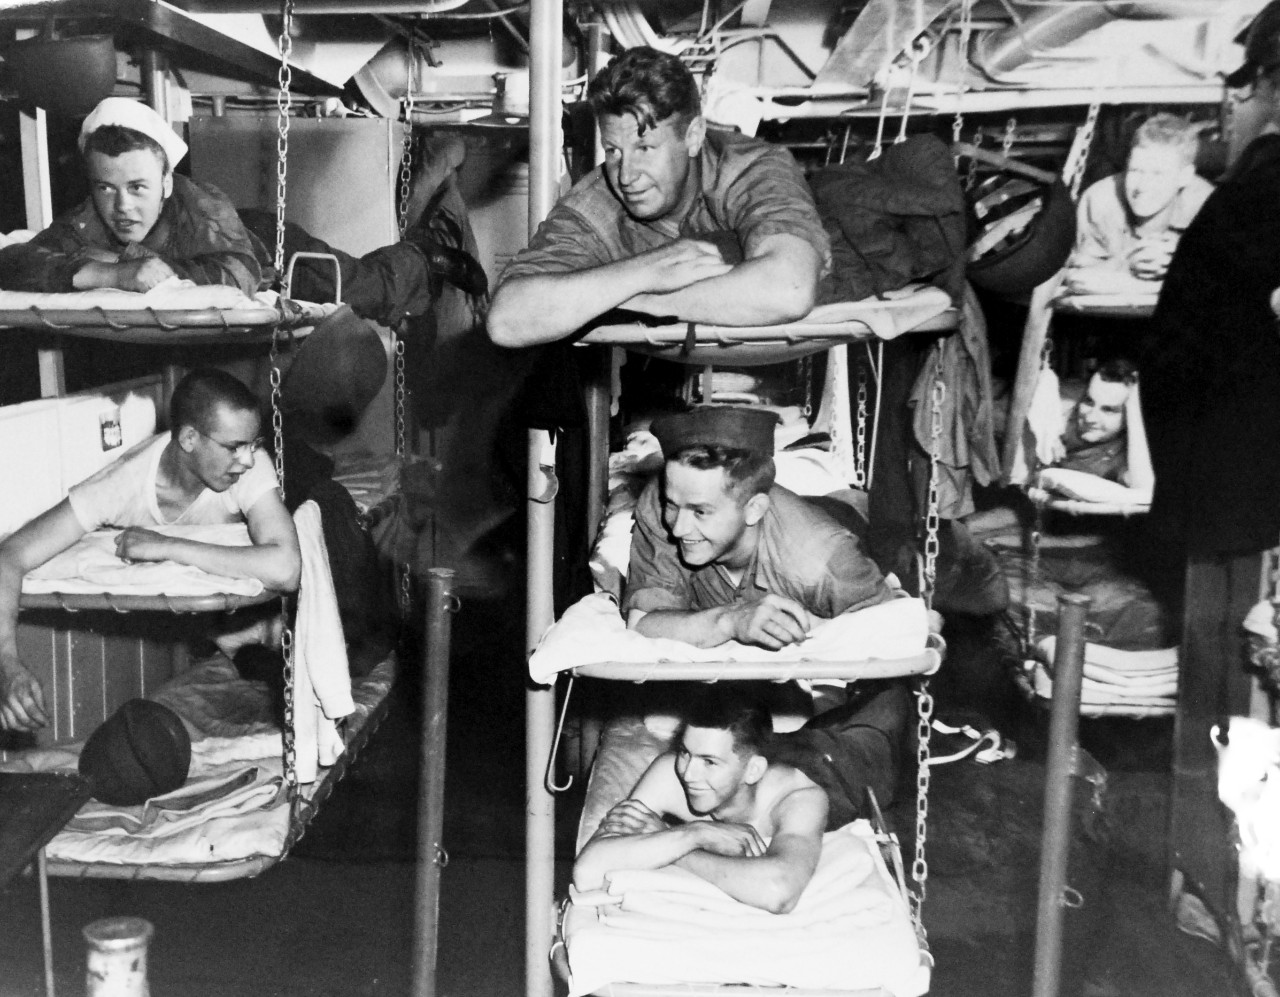 LC-USZ62-98979: Operation Husky - Invasion of Sicily, July-August 1943. Crew Quarters Were Comfortable.  With all available space utilized aboard the LST (landing ship, tank), crew quarters are nevertheless comfortable.  These North African bound amphibious forces take it easy during a leisure moment. Photograph released July 13, 1943.  Photographed through Mylar sleeve. U.S. Navy Photograph. Courtesy of the Library of Congress:  Lot-805. (2015/10/30).